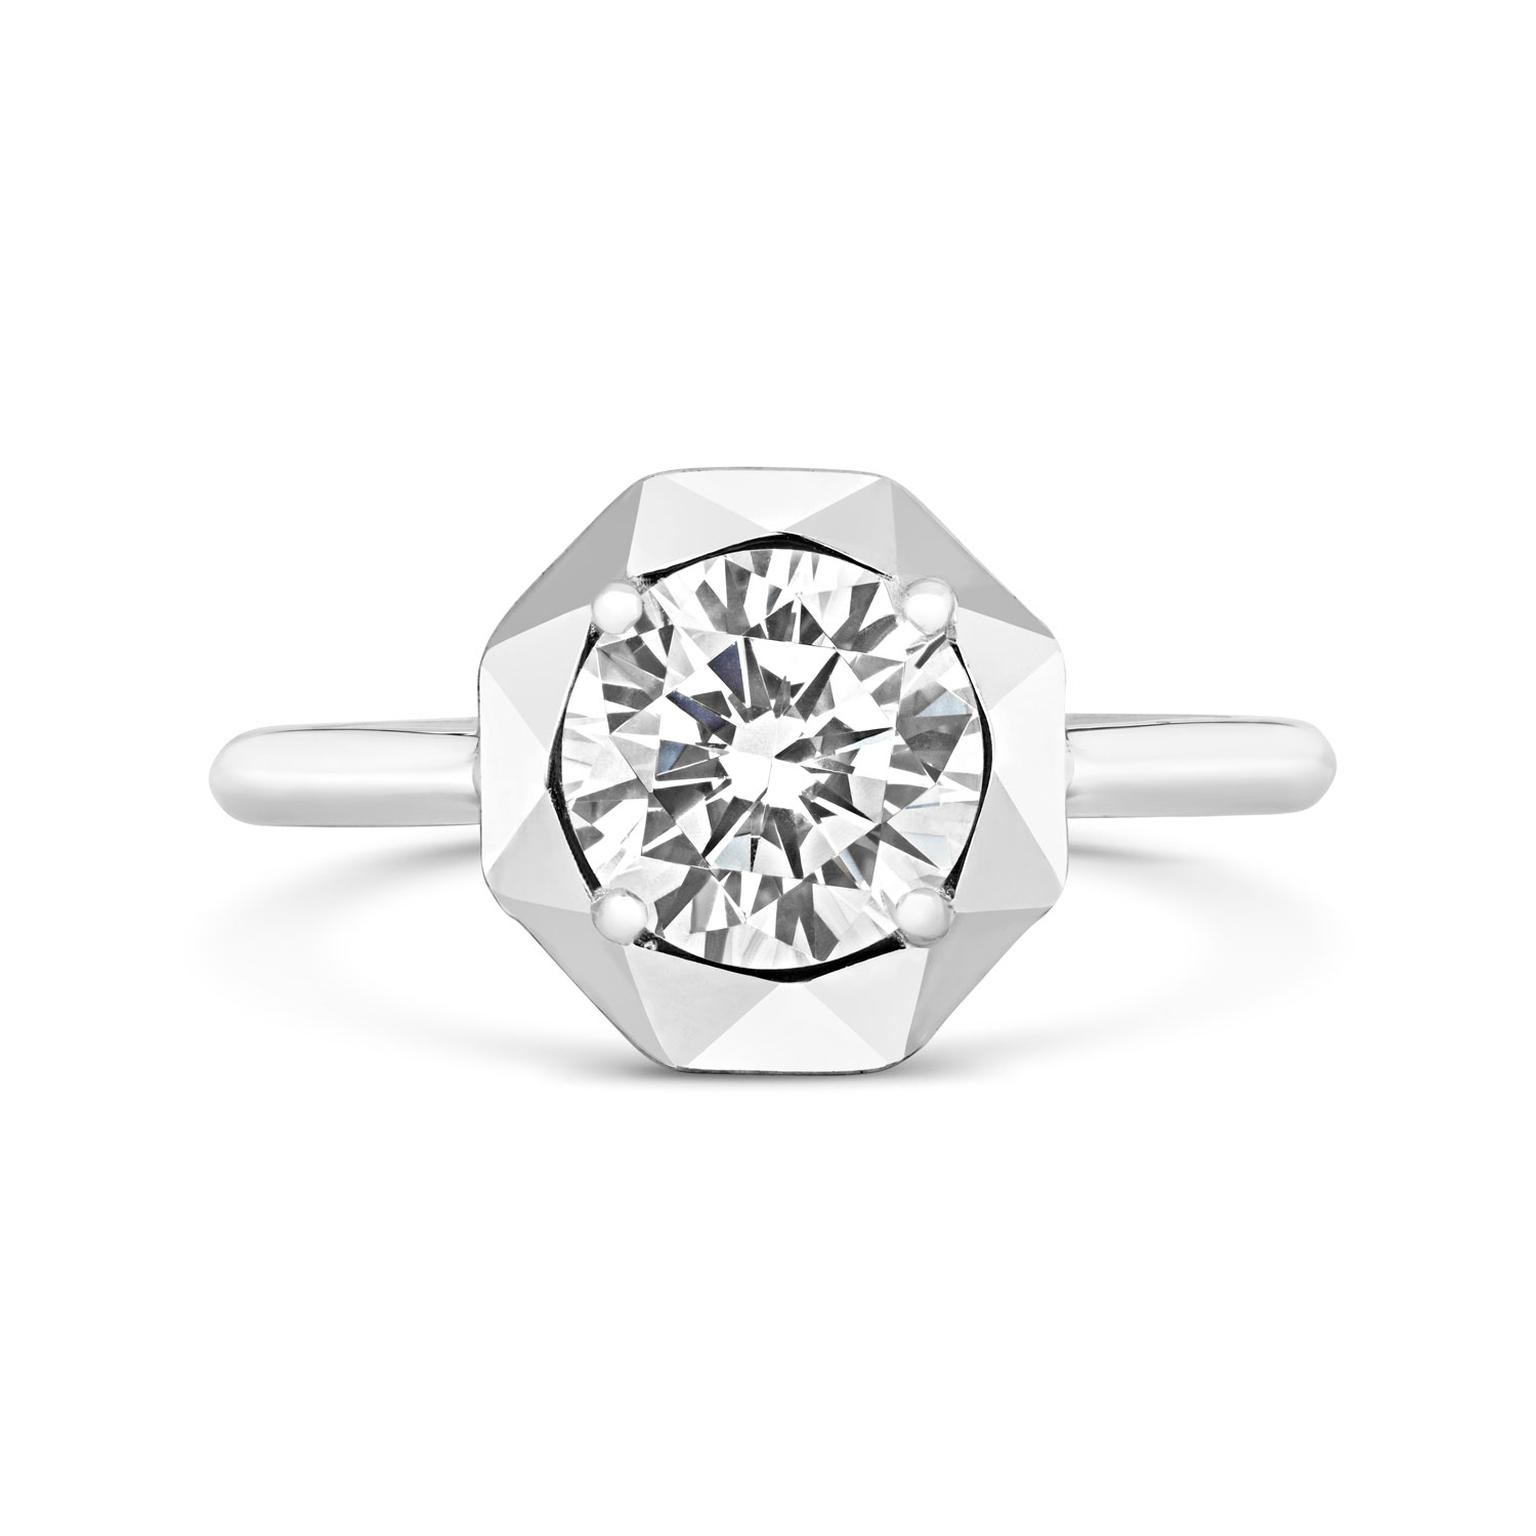 CRED Stella solitaire Canadian diamond ring